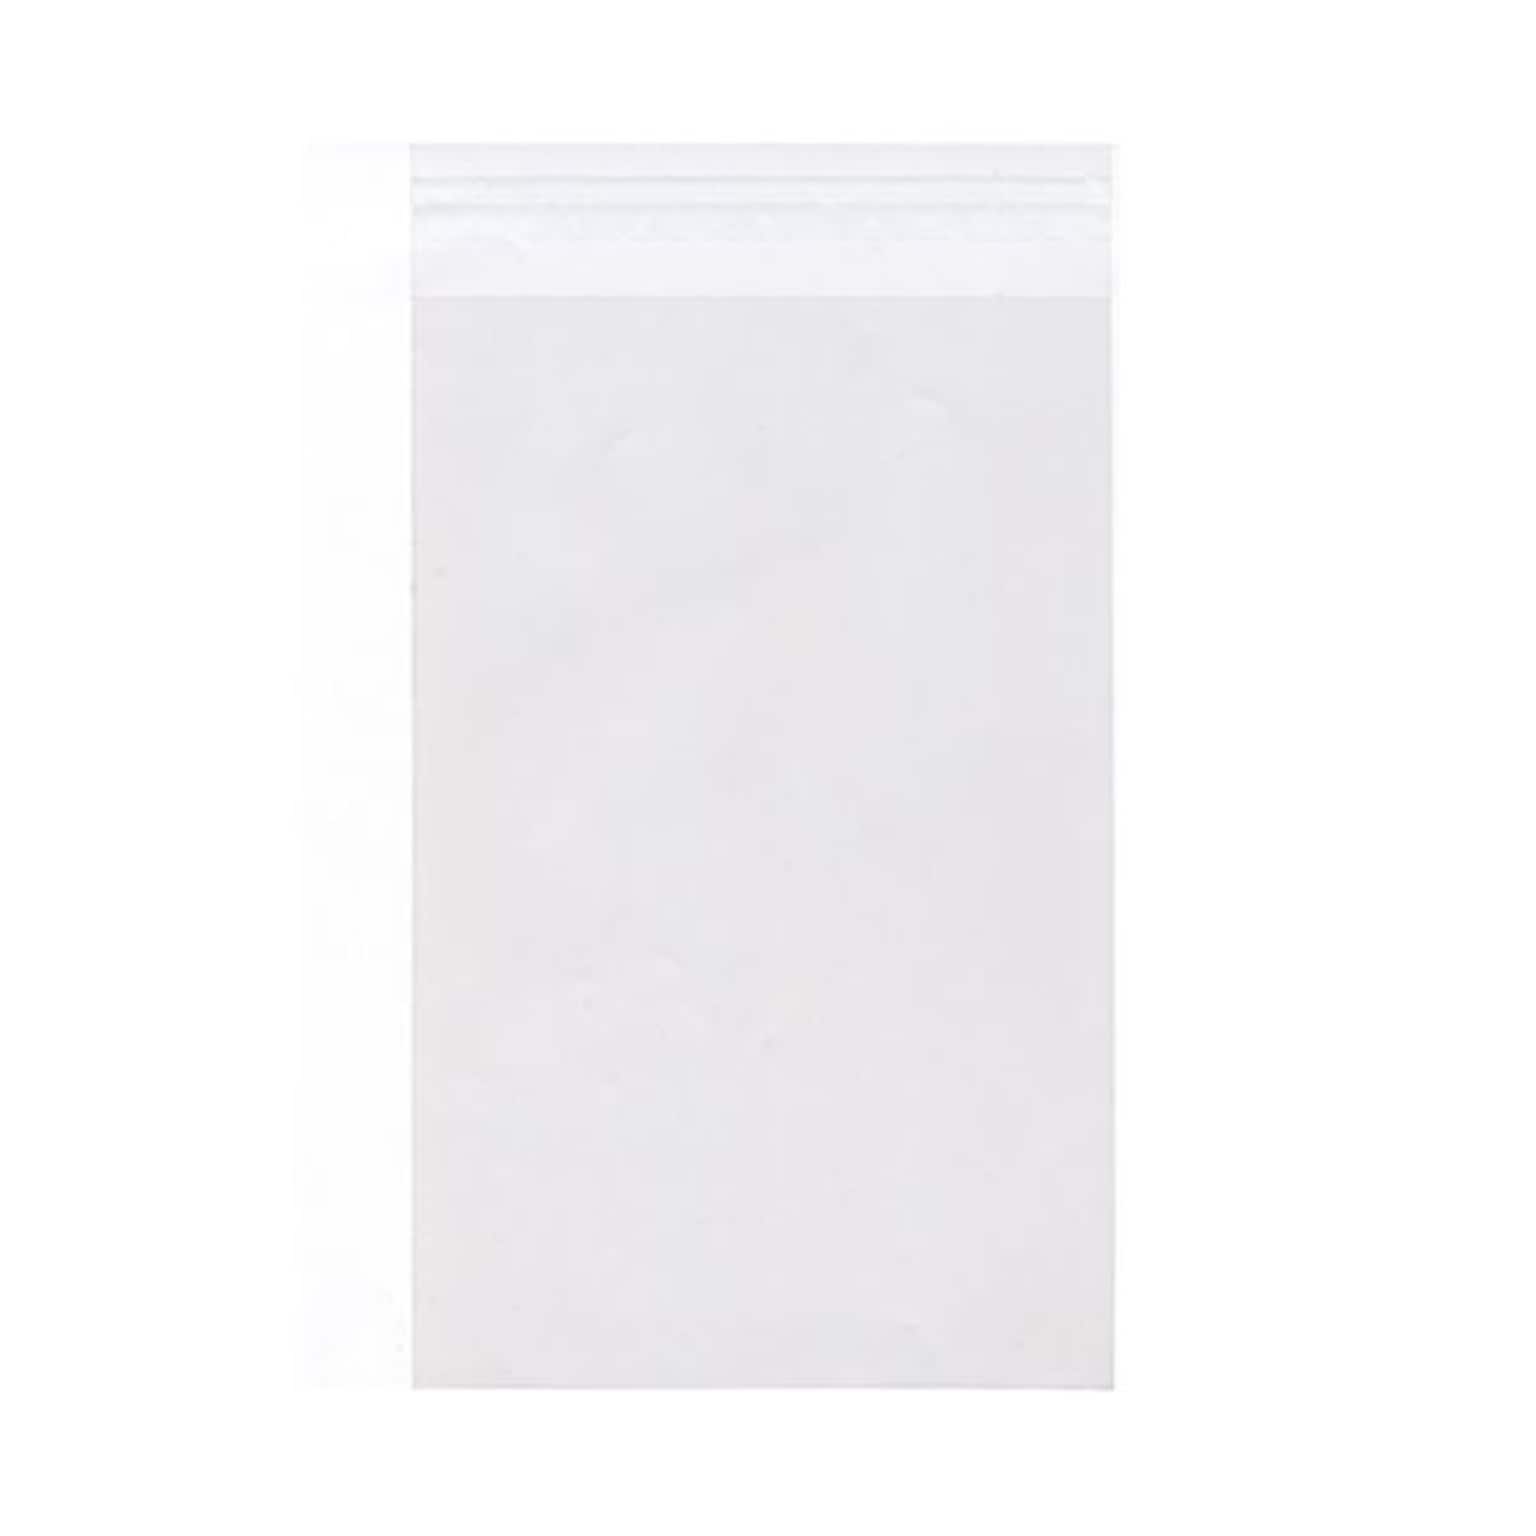 JAM Paper Cello Sleeves with Peel & Seal Closure 13.4375 x 19.25, Clear, 100/Pack (13.5X19.25CELLO)